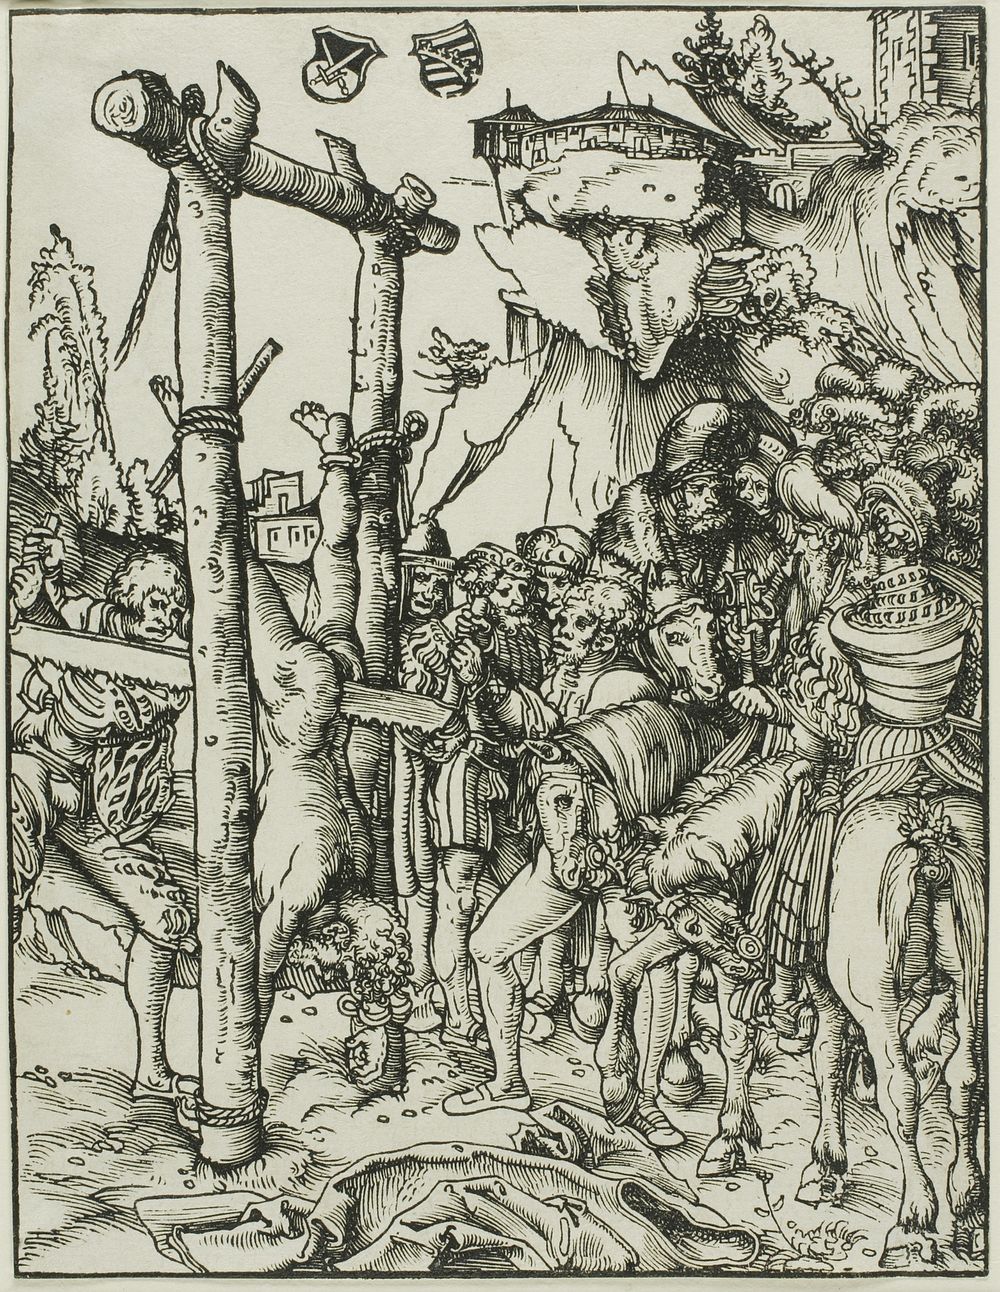 Saint Simon, from The Martyrdom of the Apostles by Lucas Cranach, the Elder